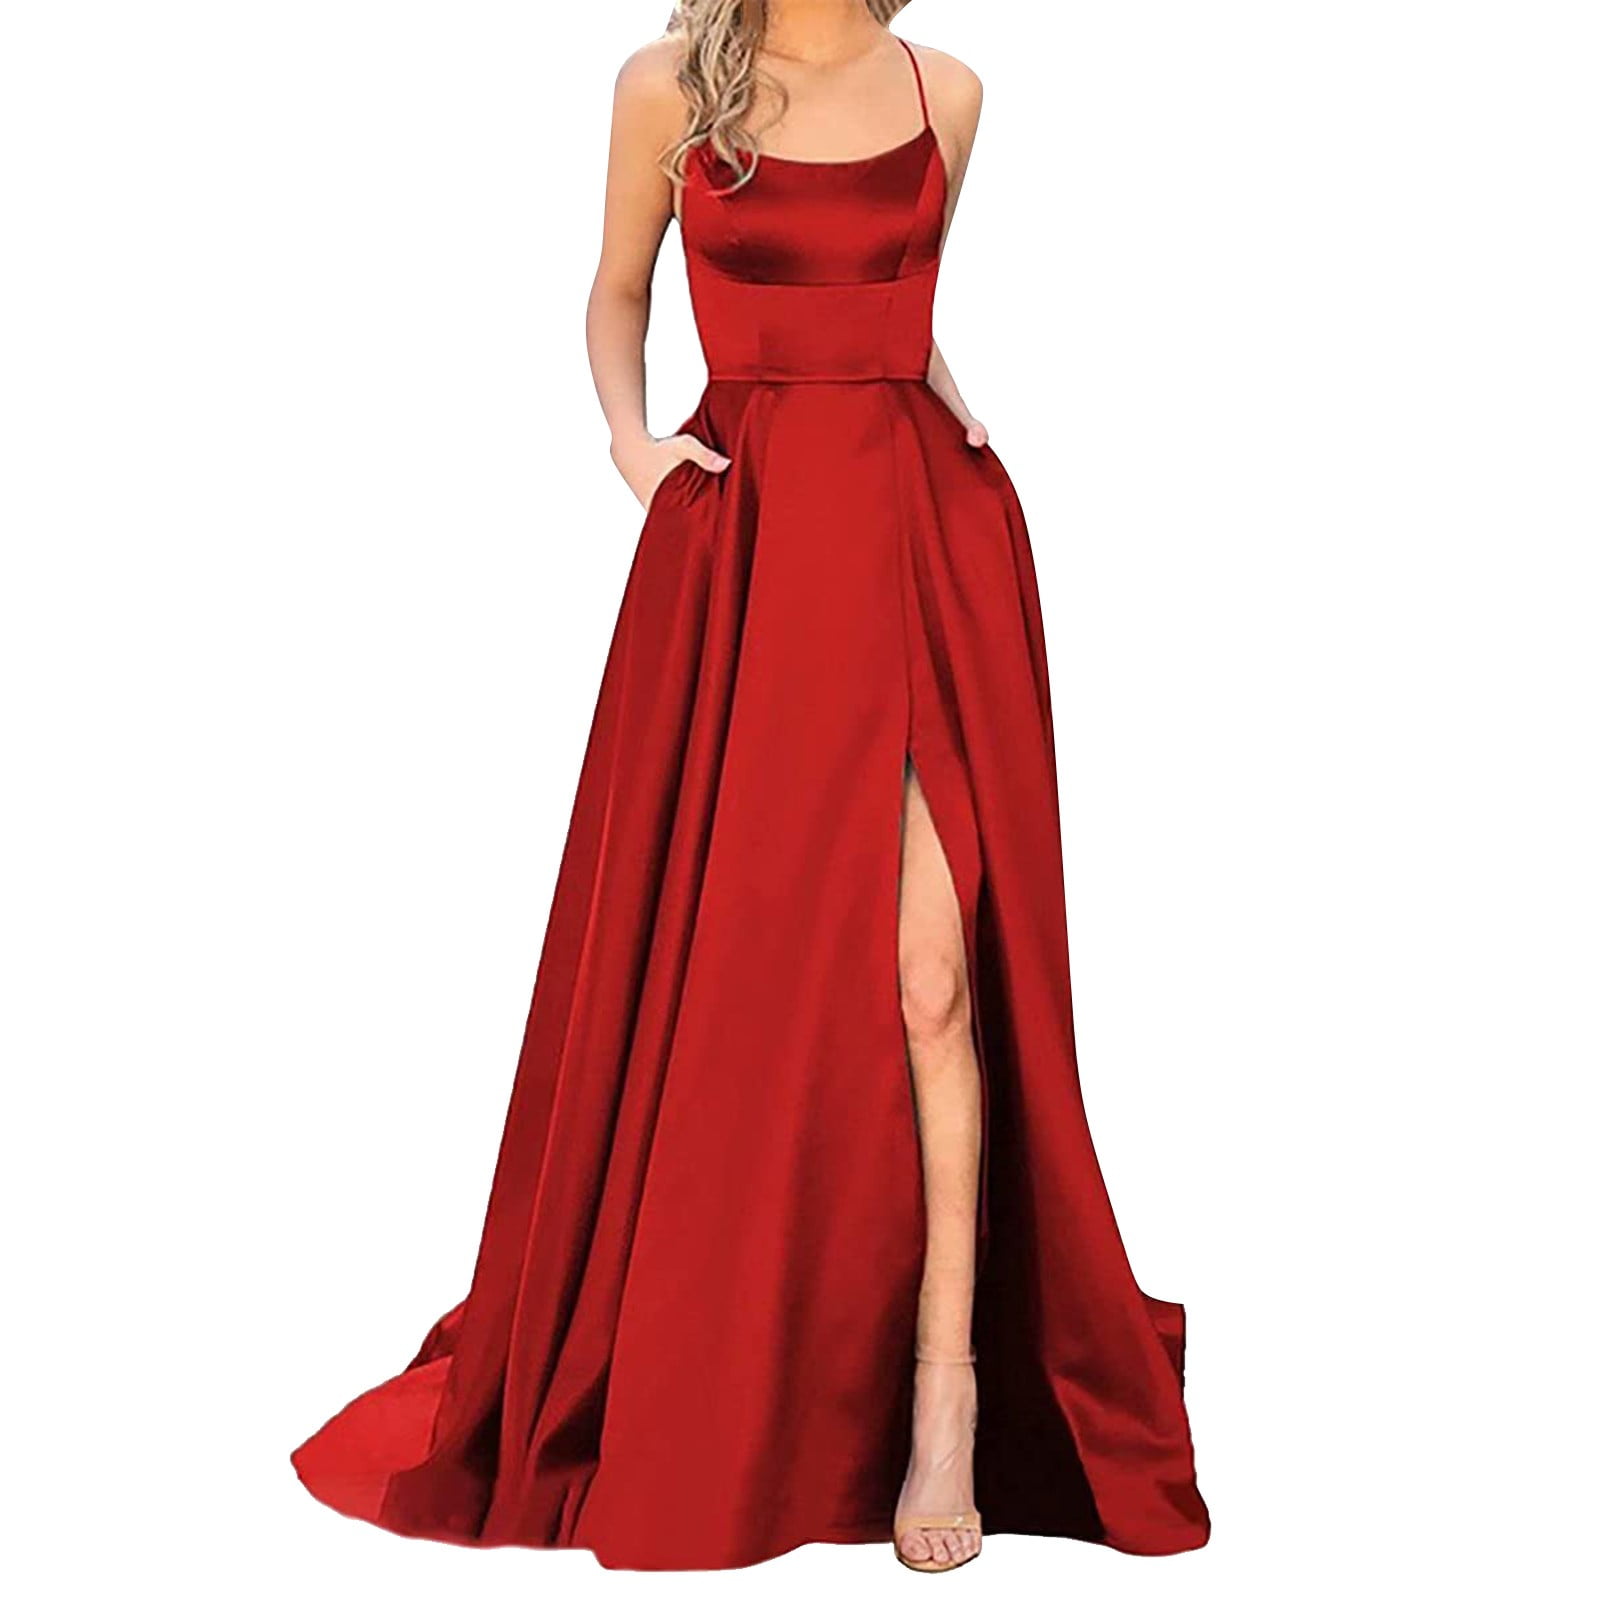 Buy full sleeve gown for women party wear in India @ Limeroad